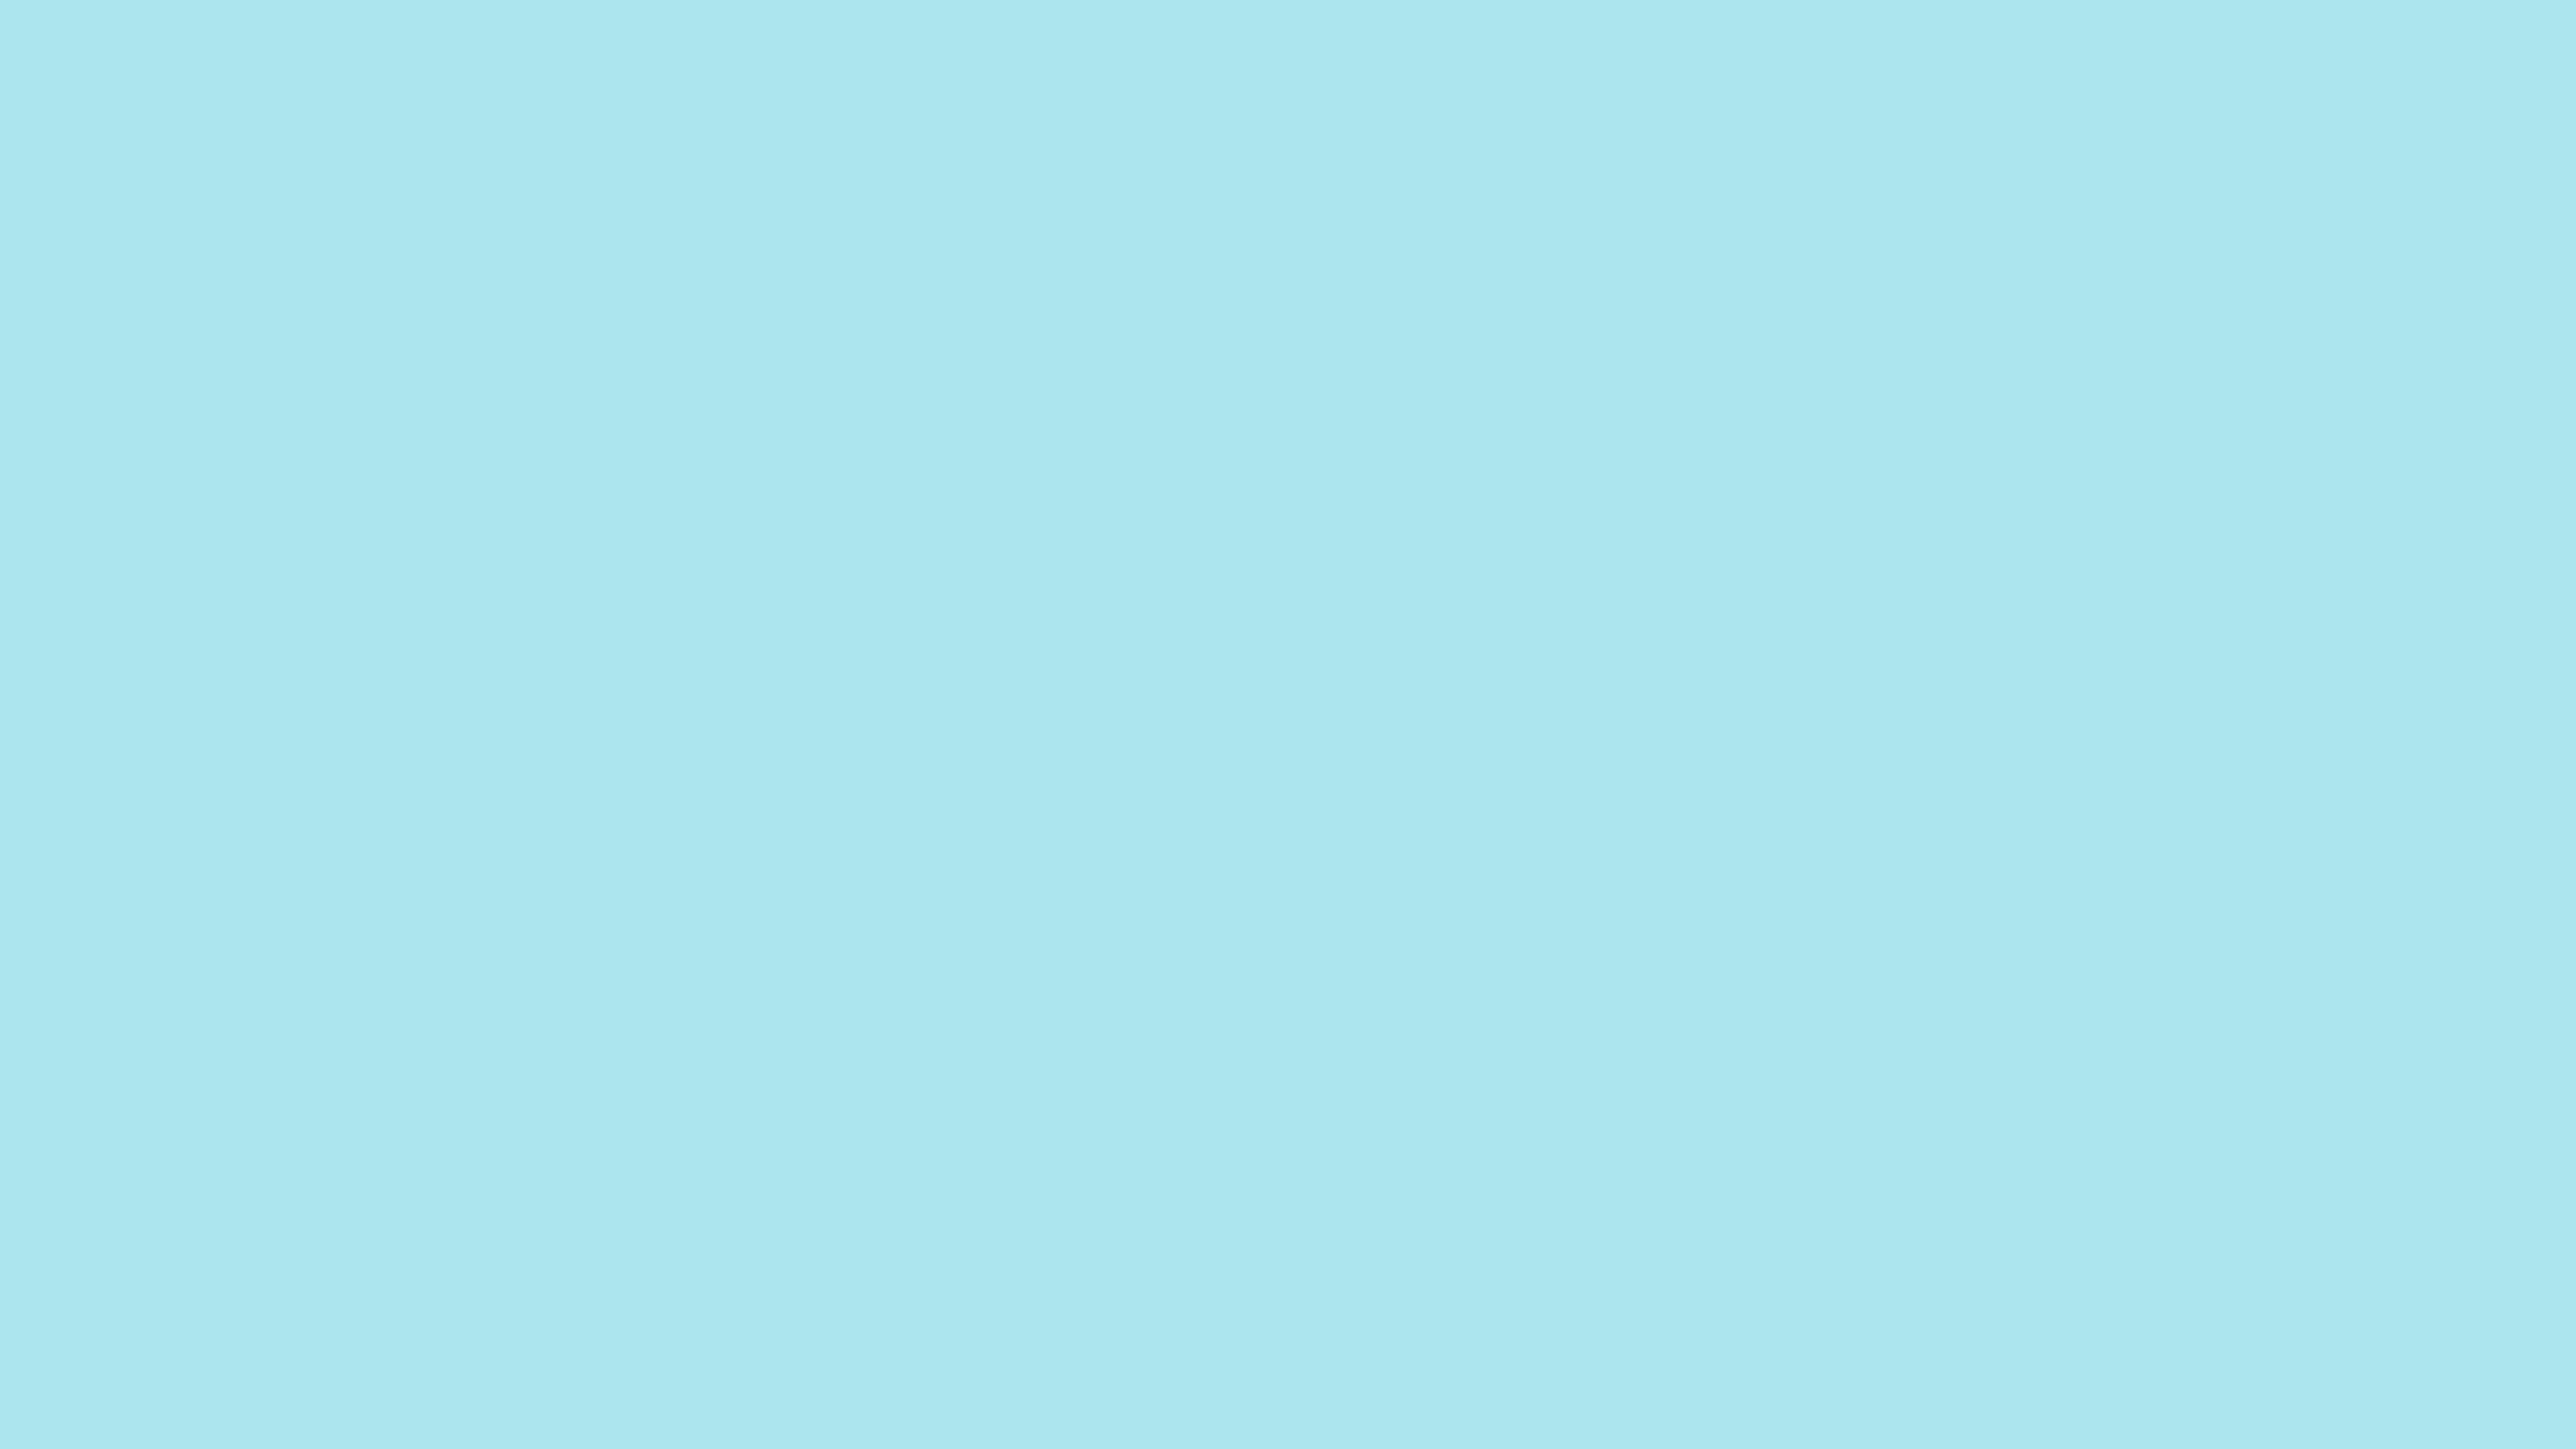 4096x2304 Blizzard Blue Solid Color Background